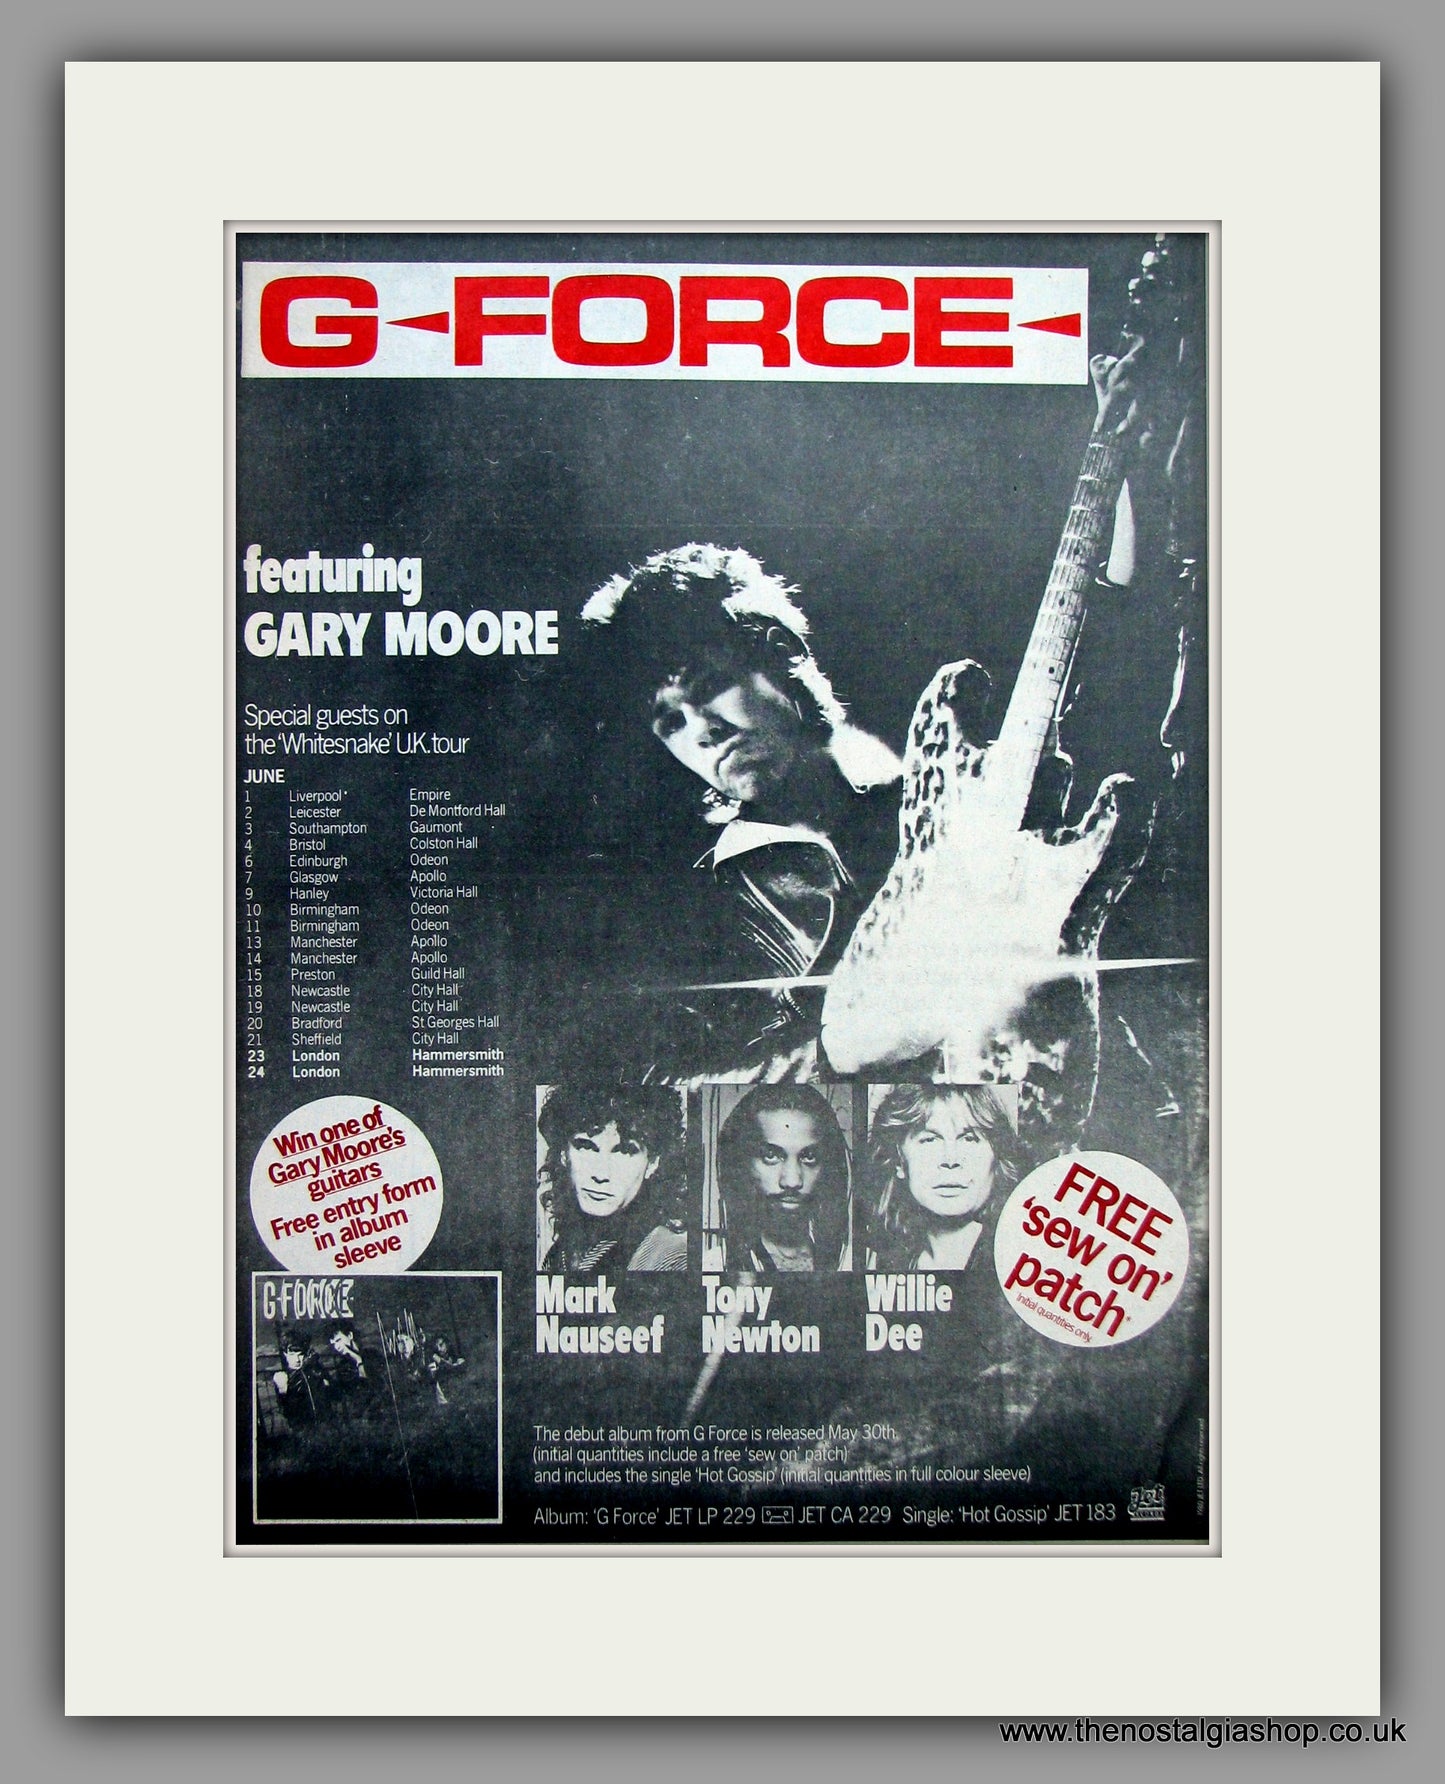 G Force with Gary Moore UK Tour Dates.  Original Vintage Advert 1980 (ref AD10440)